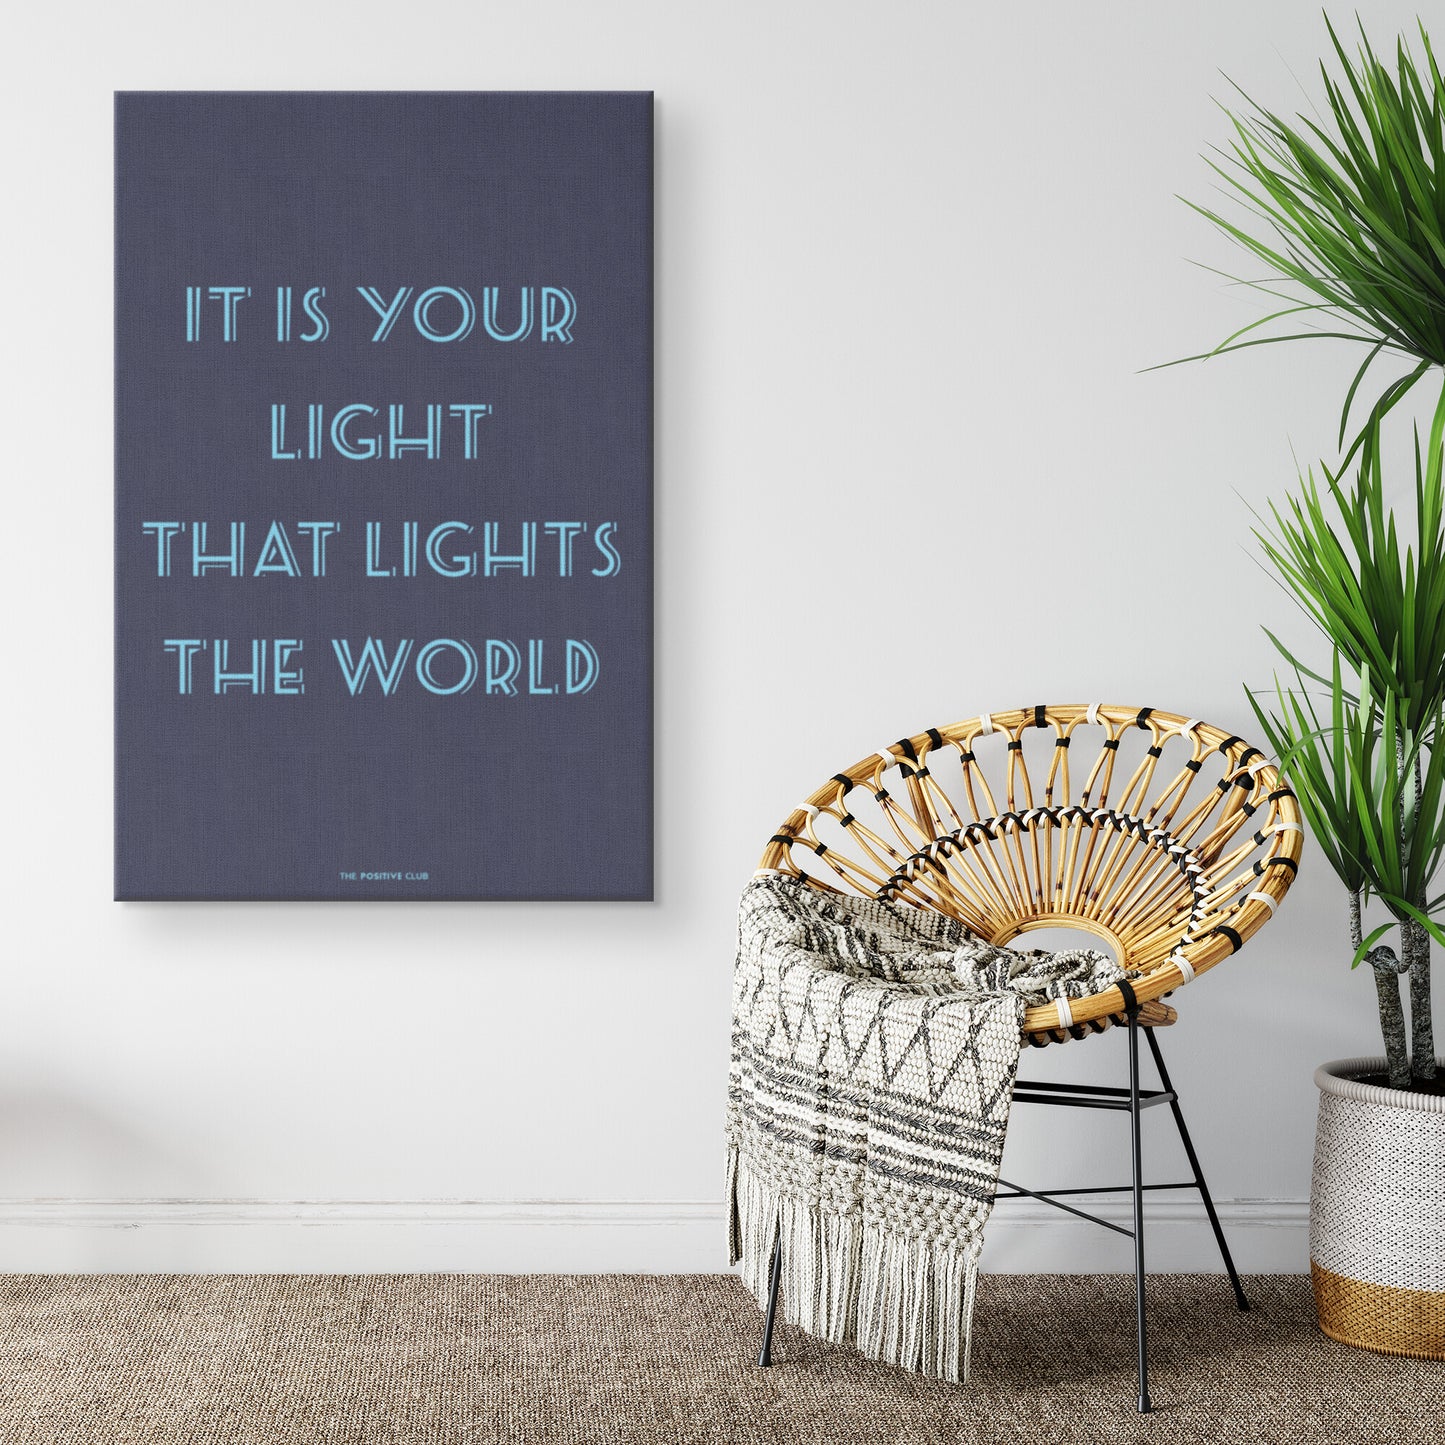 IT IS YOUR LIGHT THAT LIGHTS THE WORLD